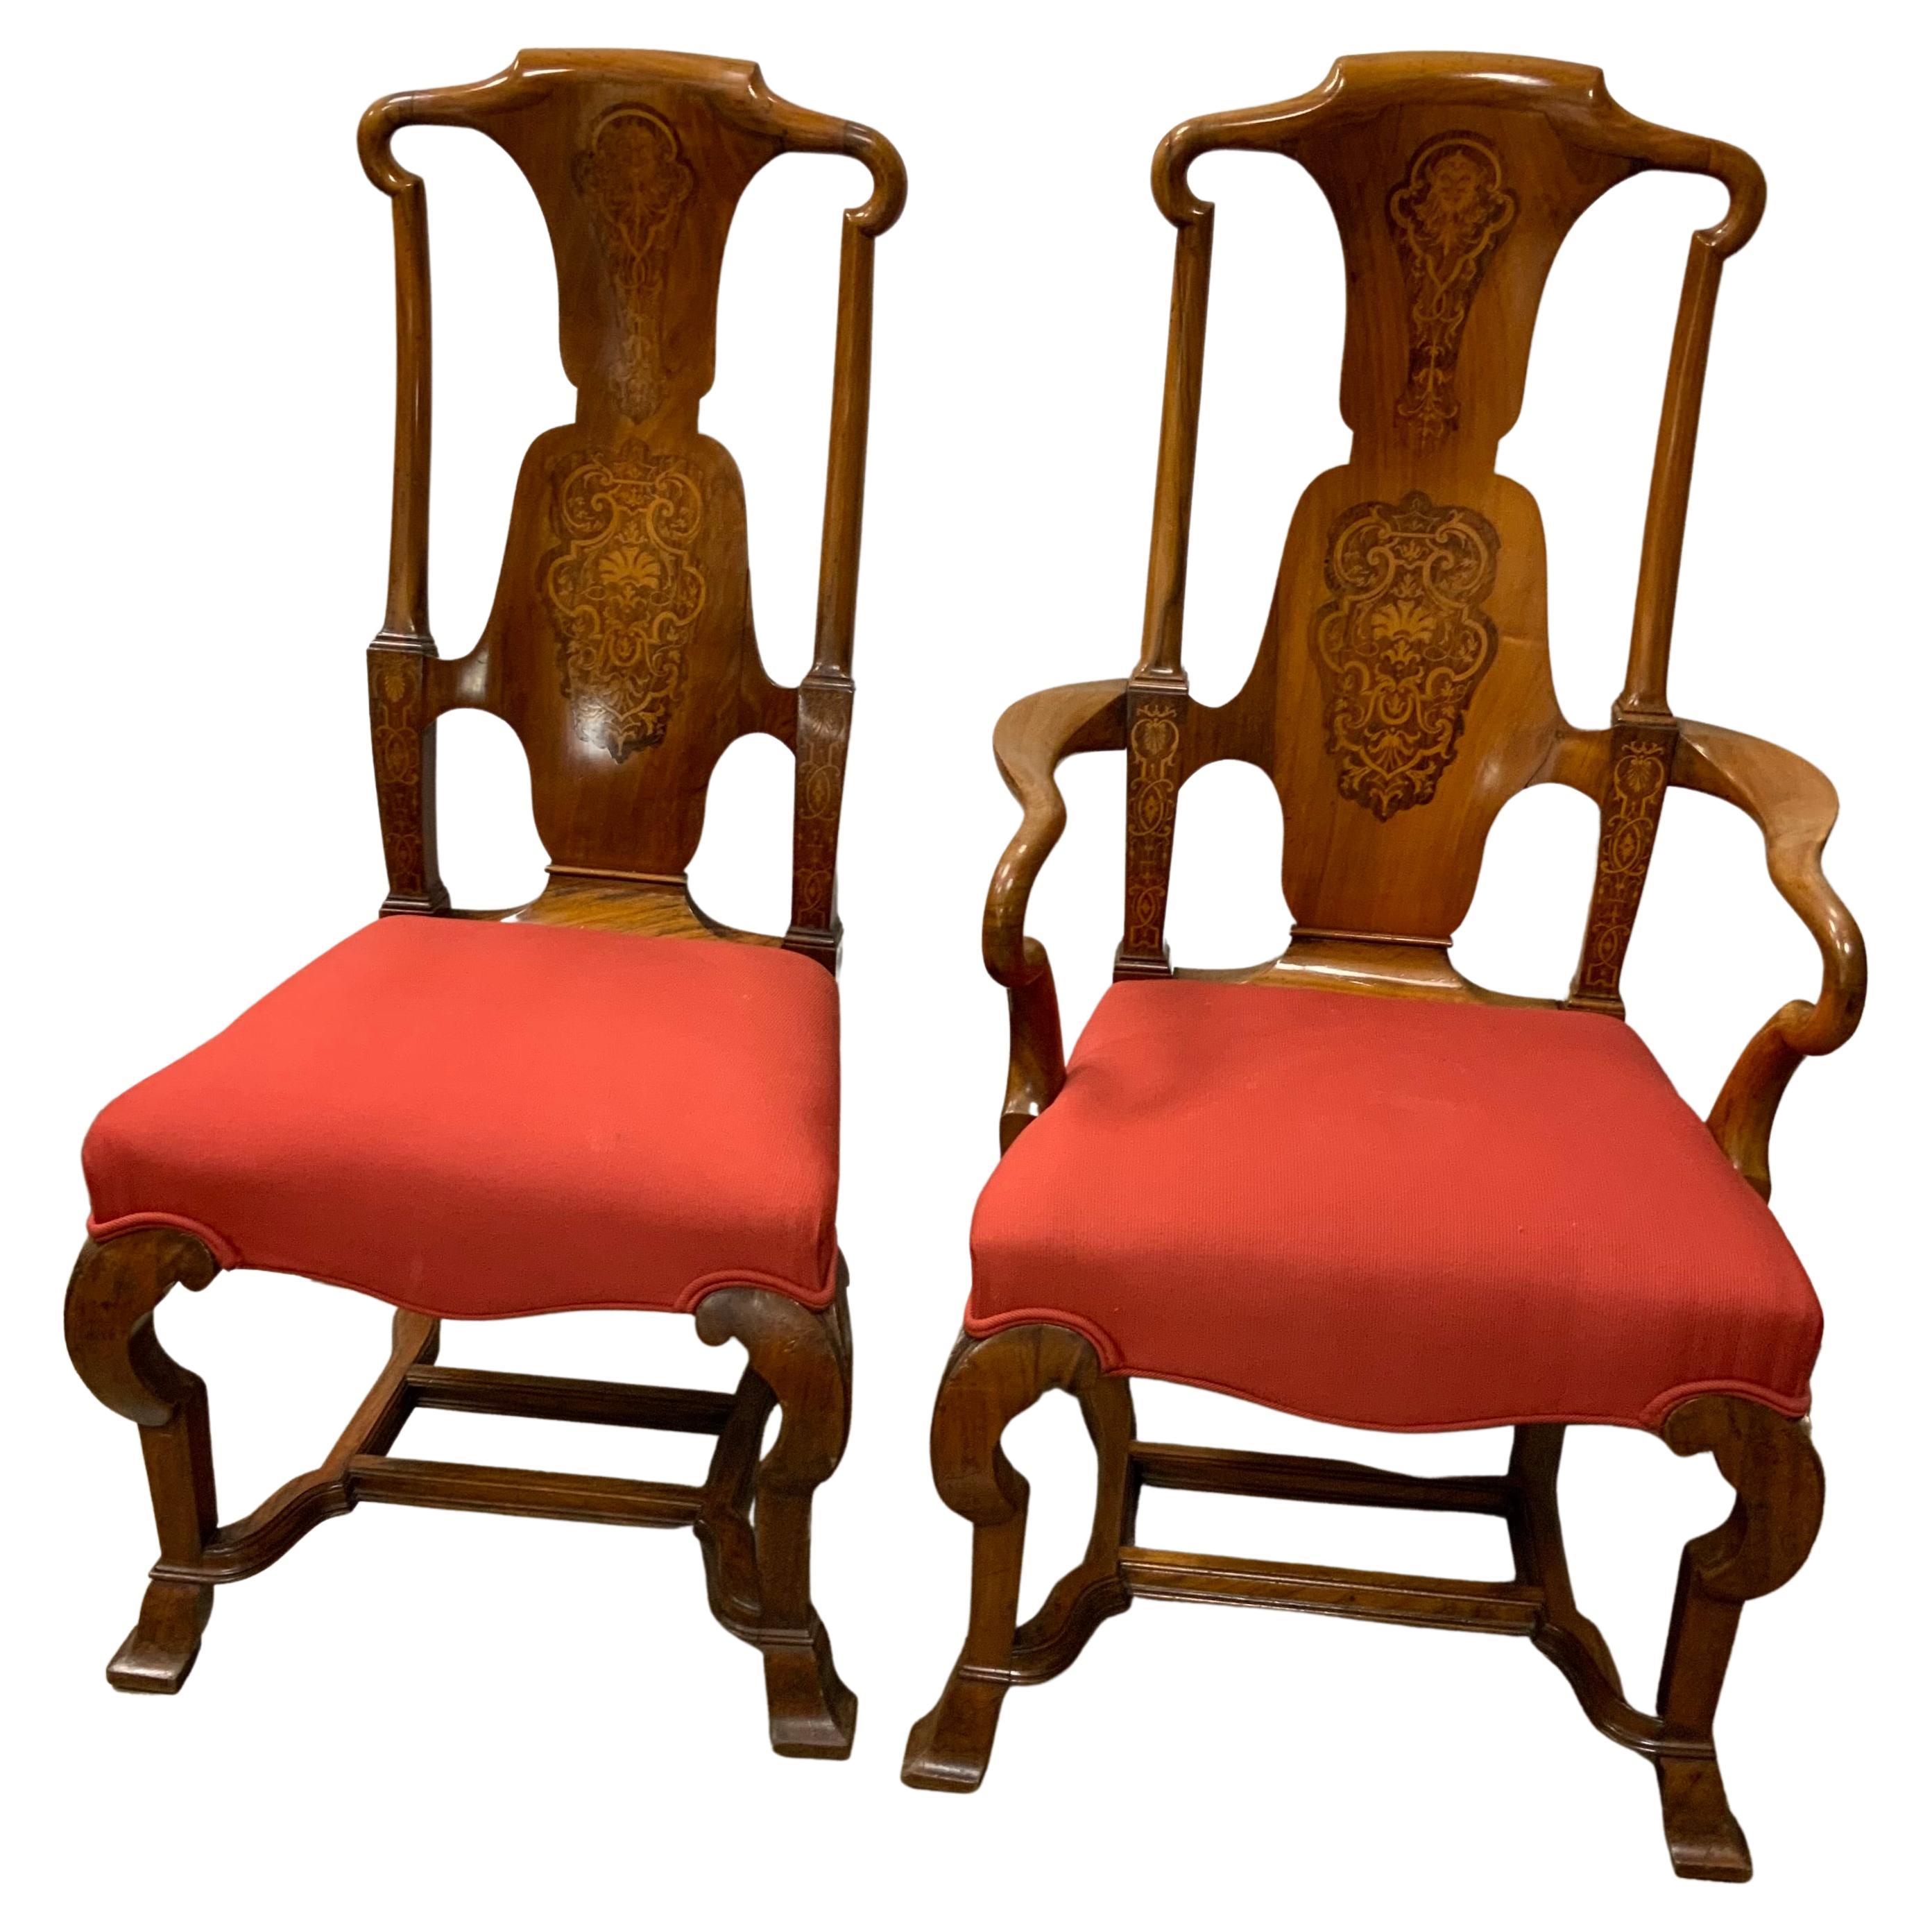 Set of 10 English dining chairs, 19 th c. Walnut with marquetry inlay For Sale